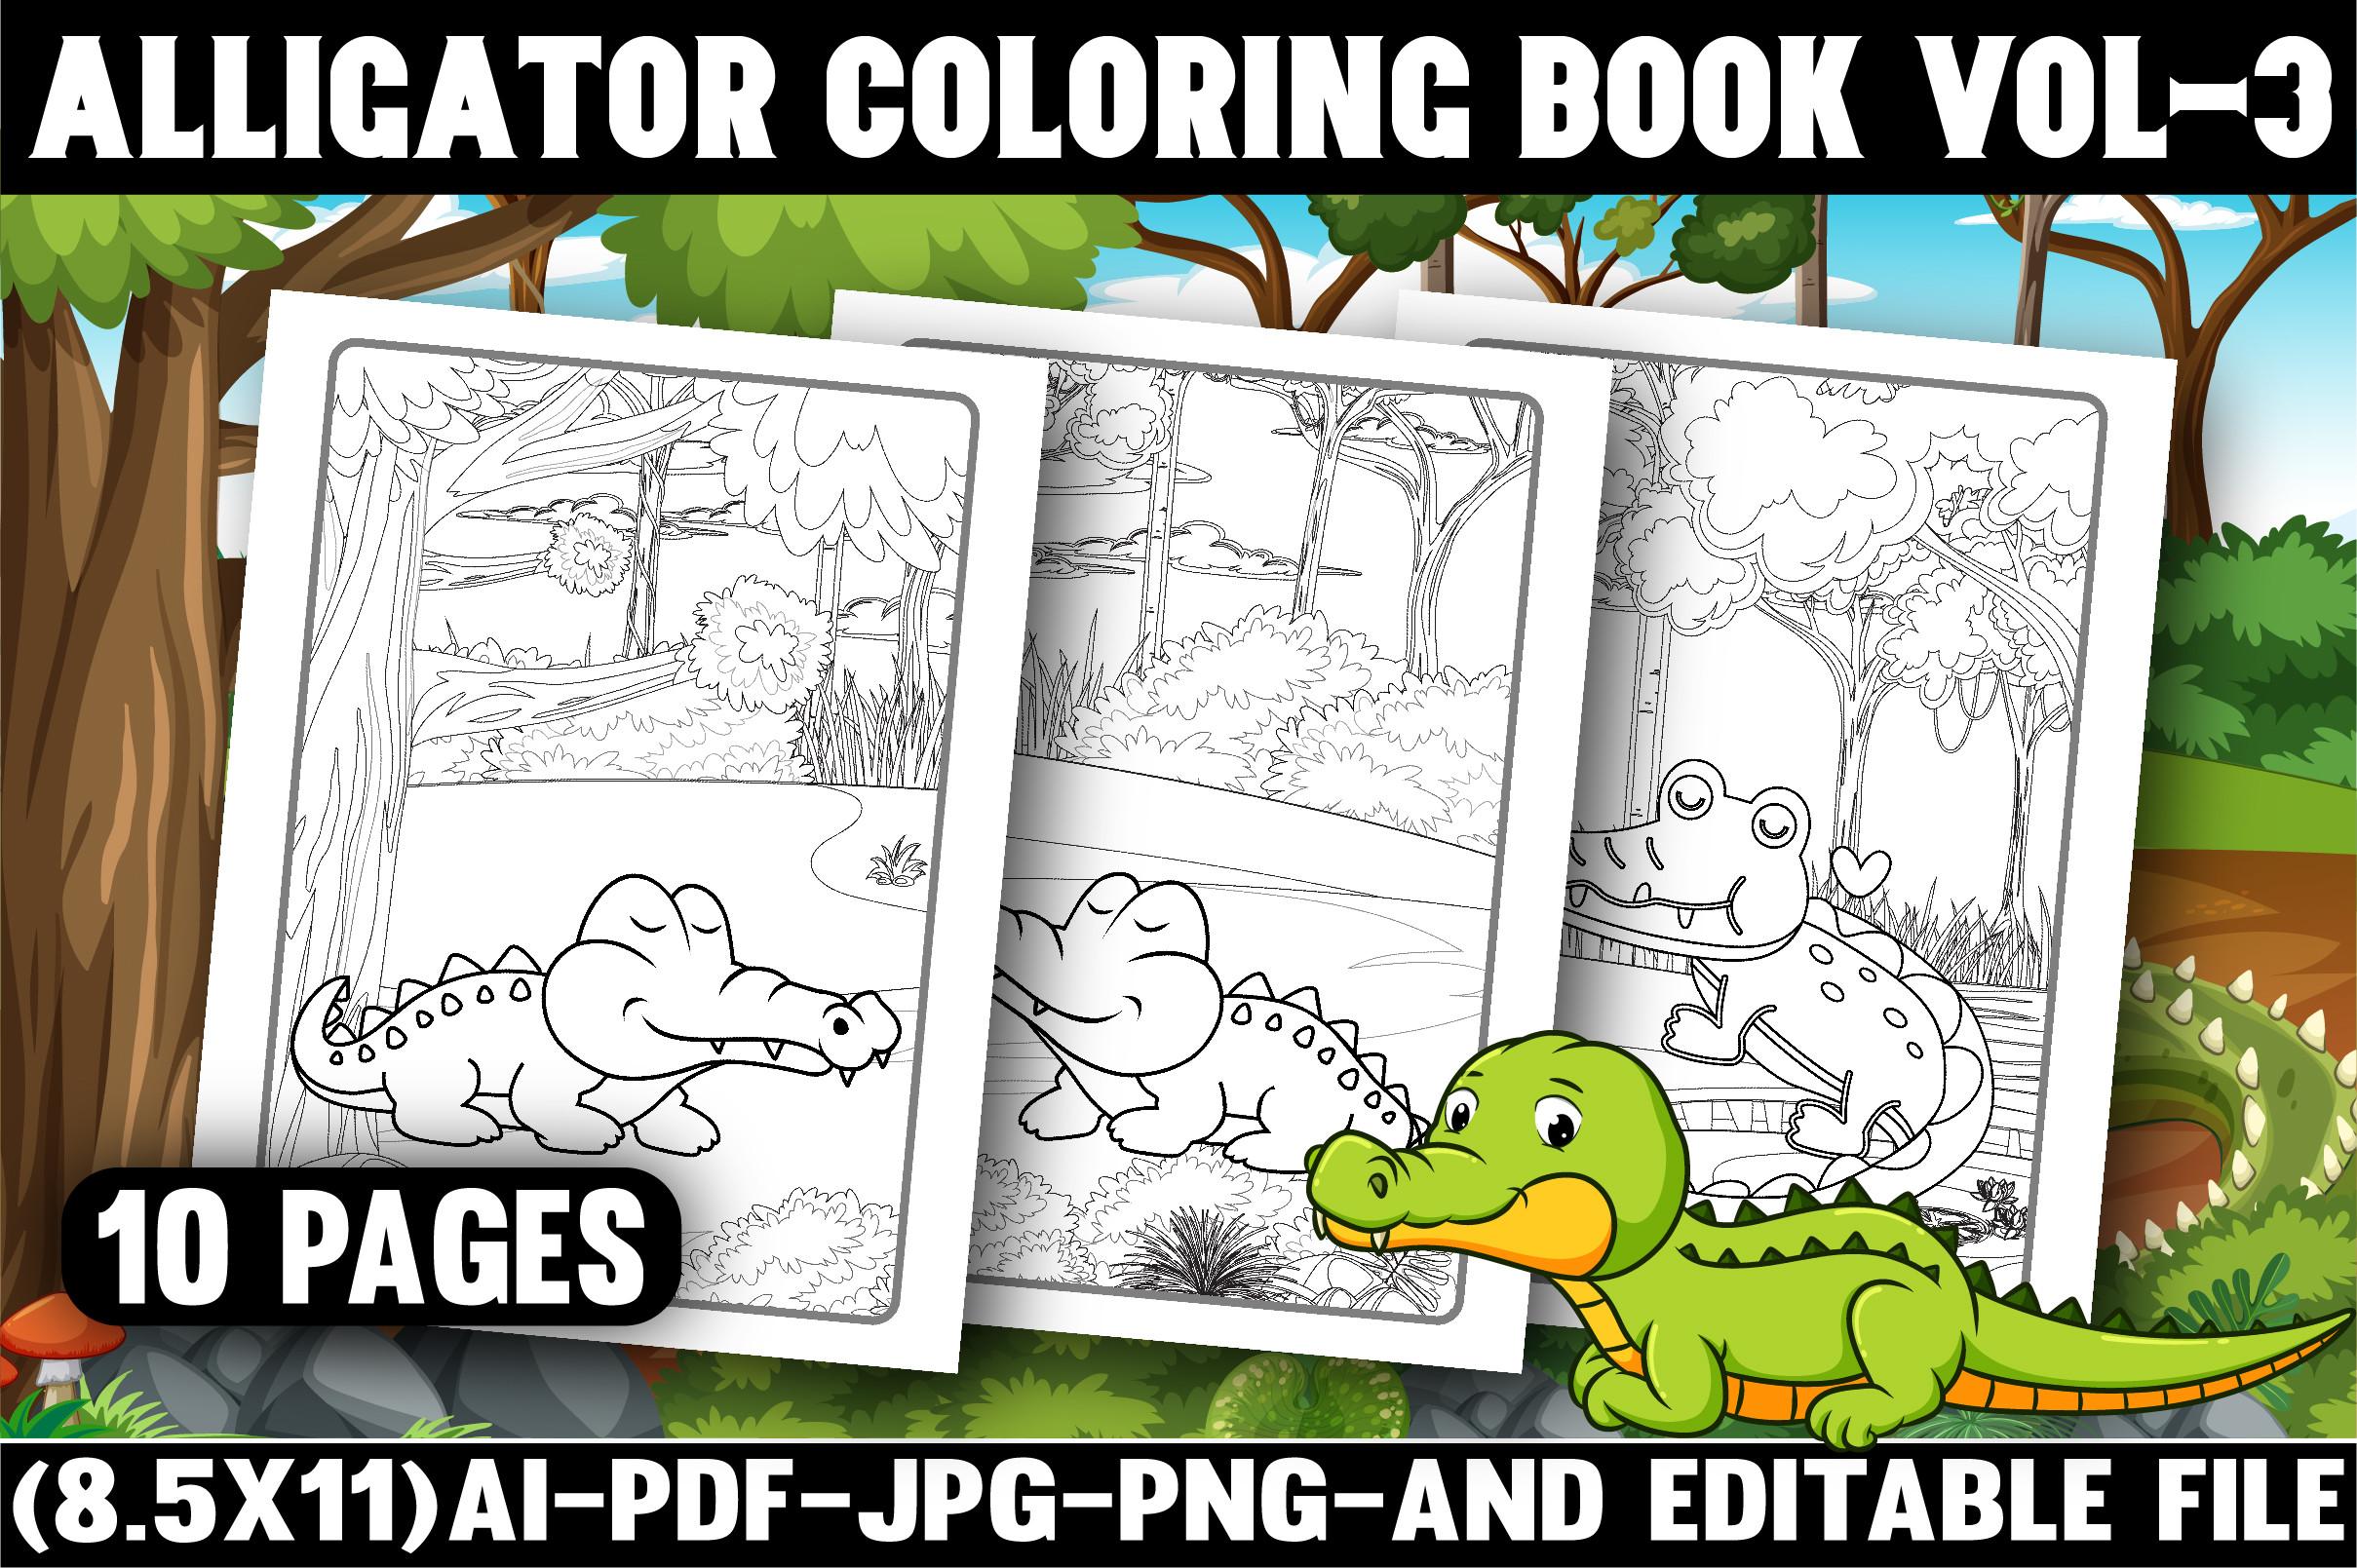 Alligator Coloring Pages for Kids